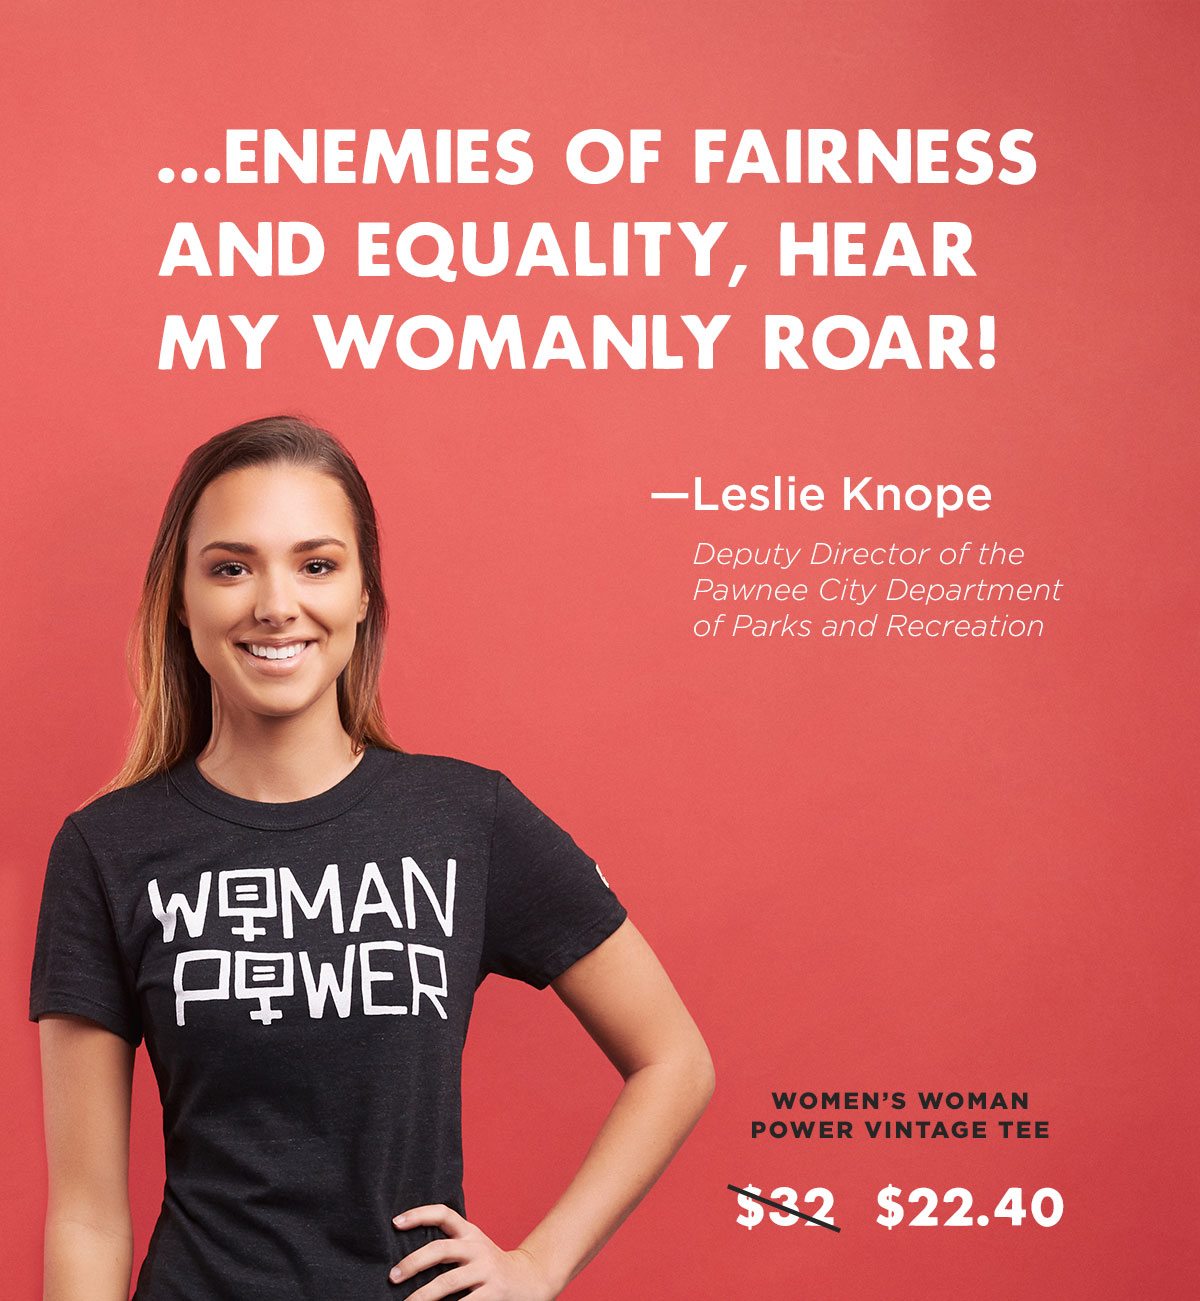 Enemies of fairness and equality, hear my womanly roar!